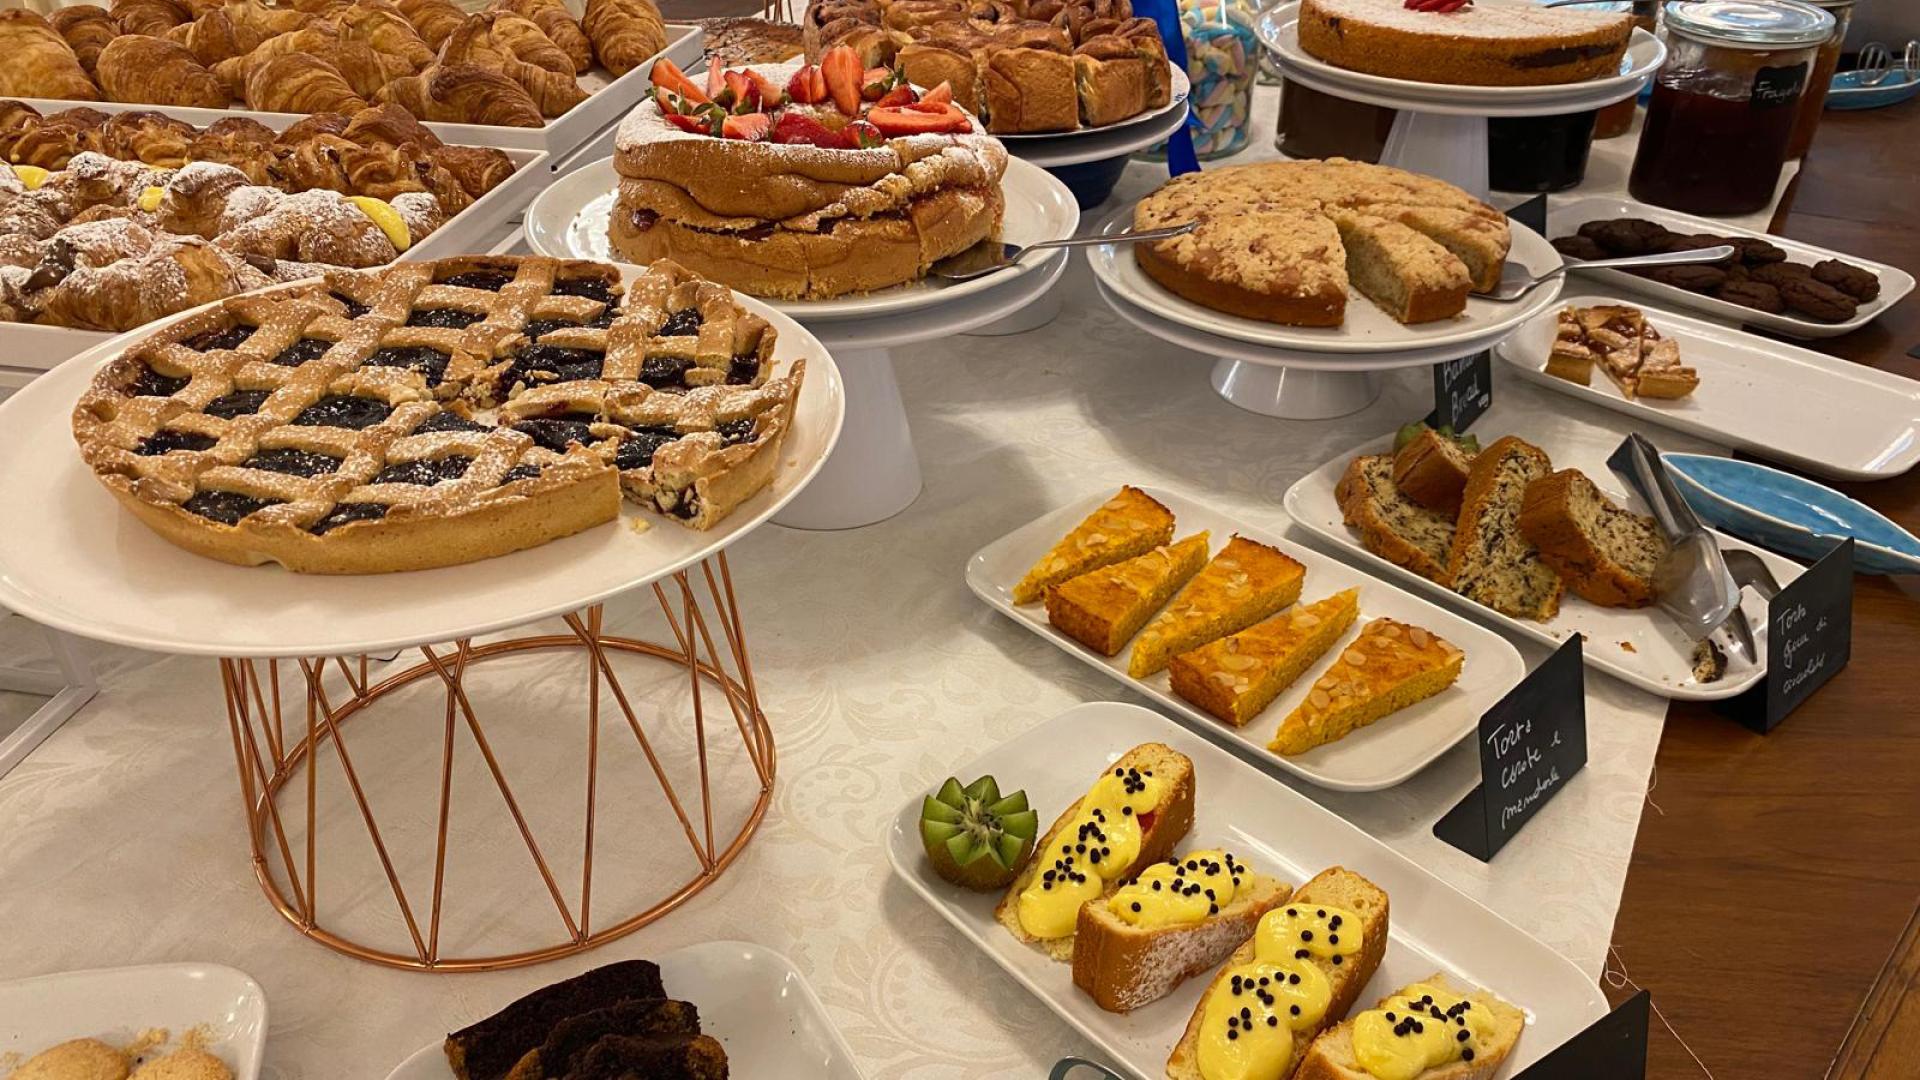 A dessert buffet with assorted cakes, pies, and pastries.